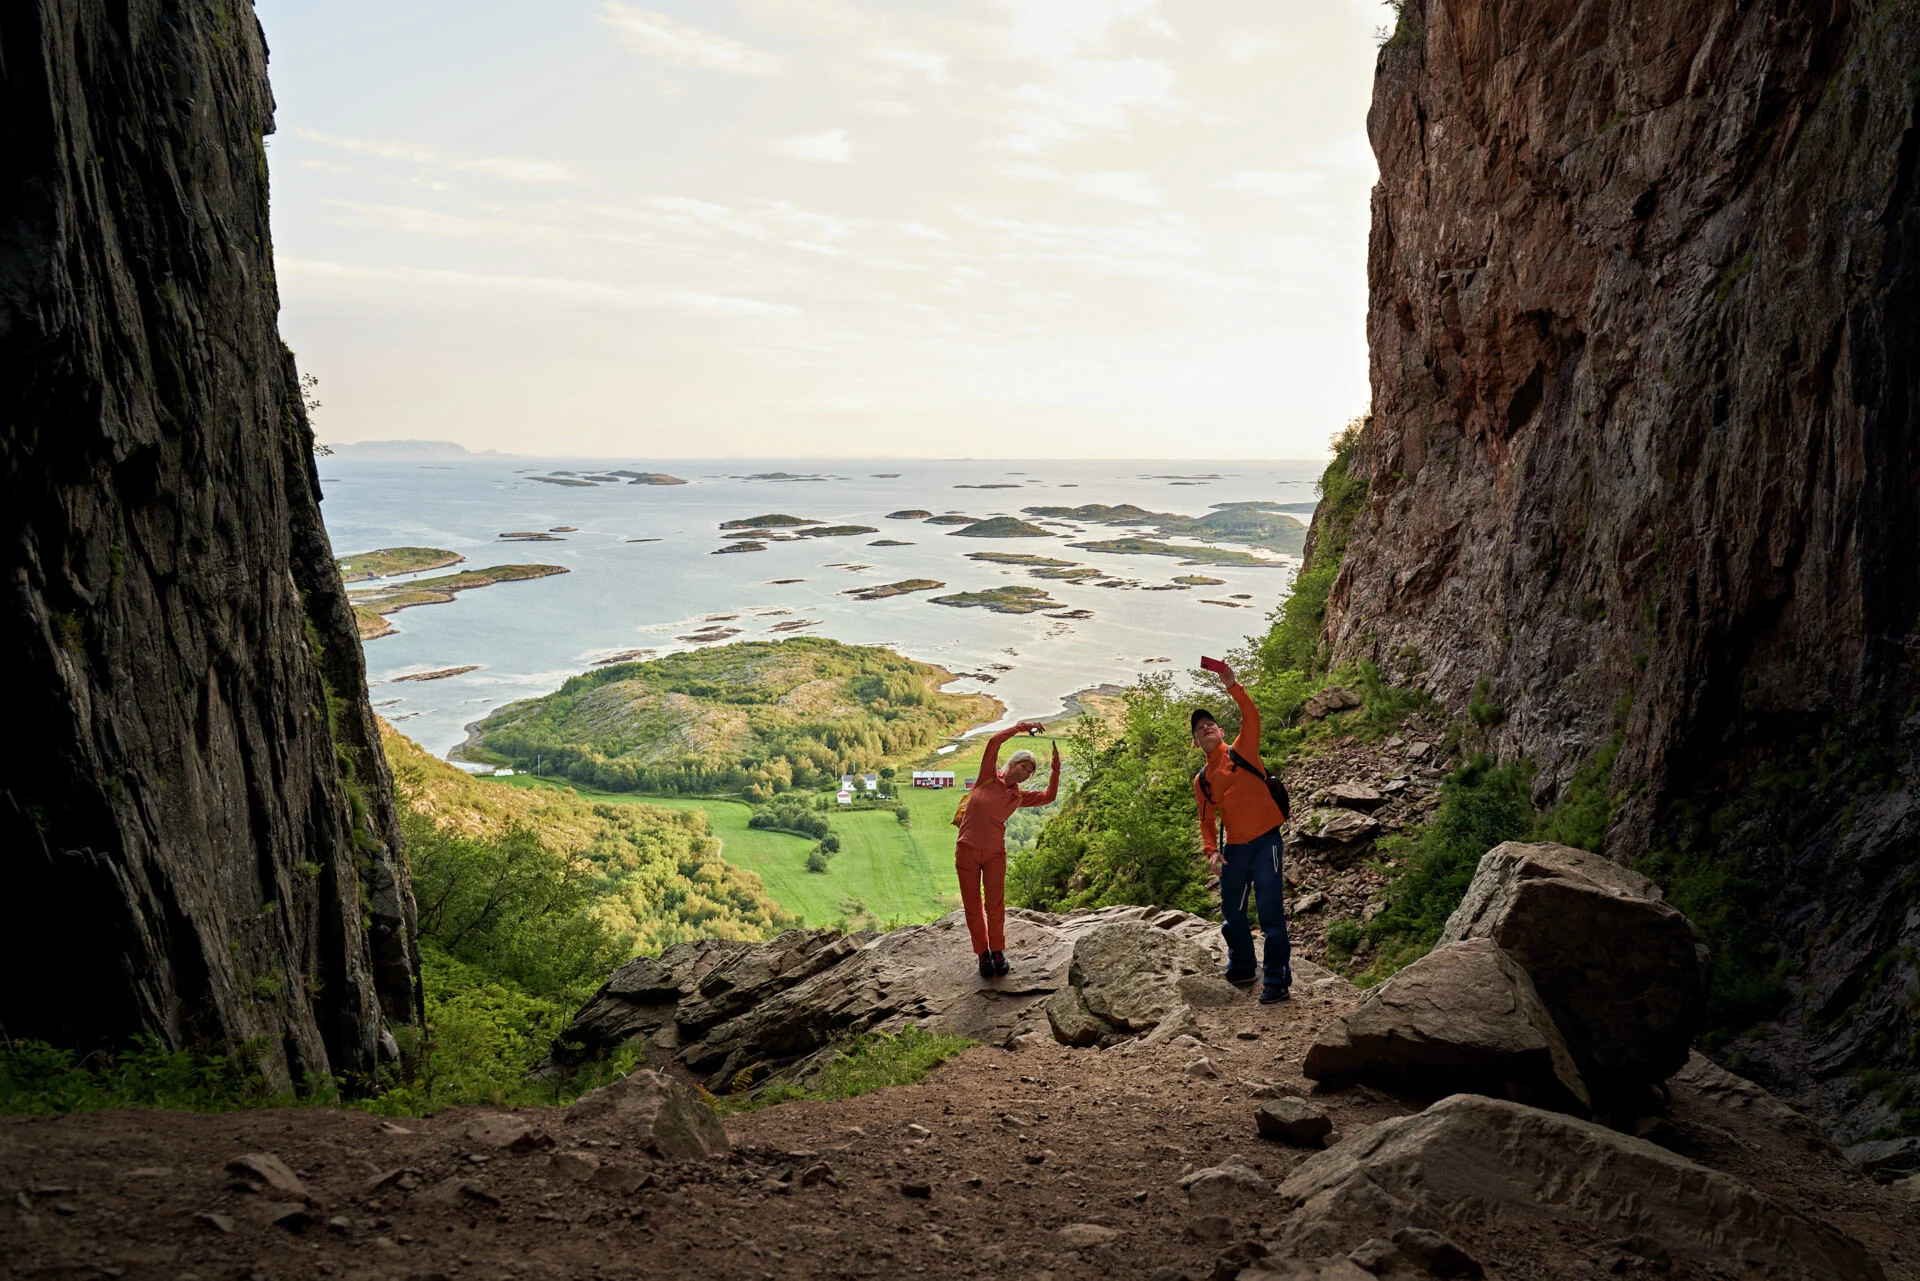 A pair of hikers taking photos at Torghatten mountain